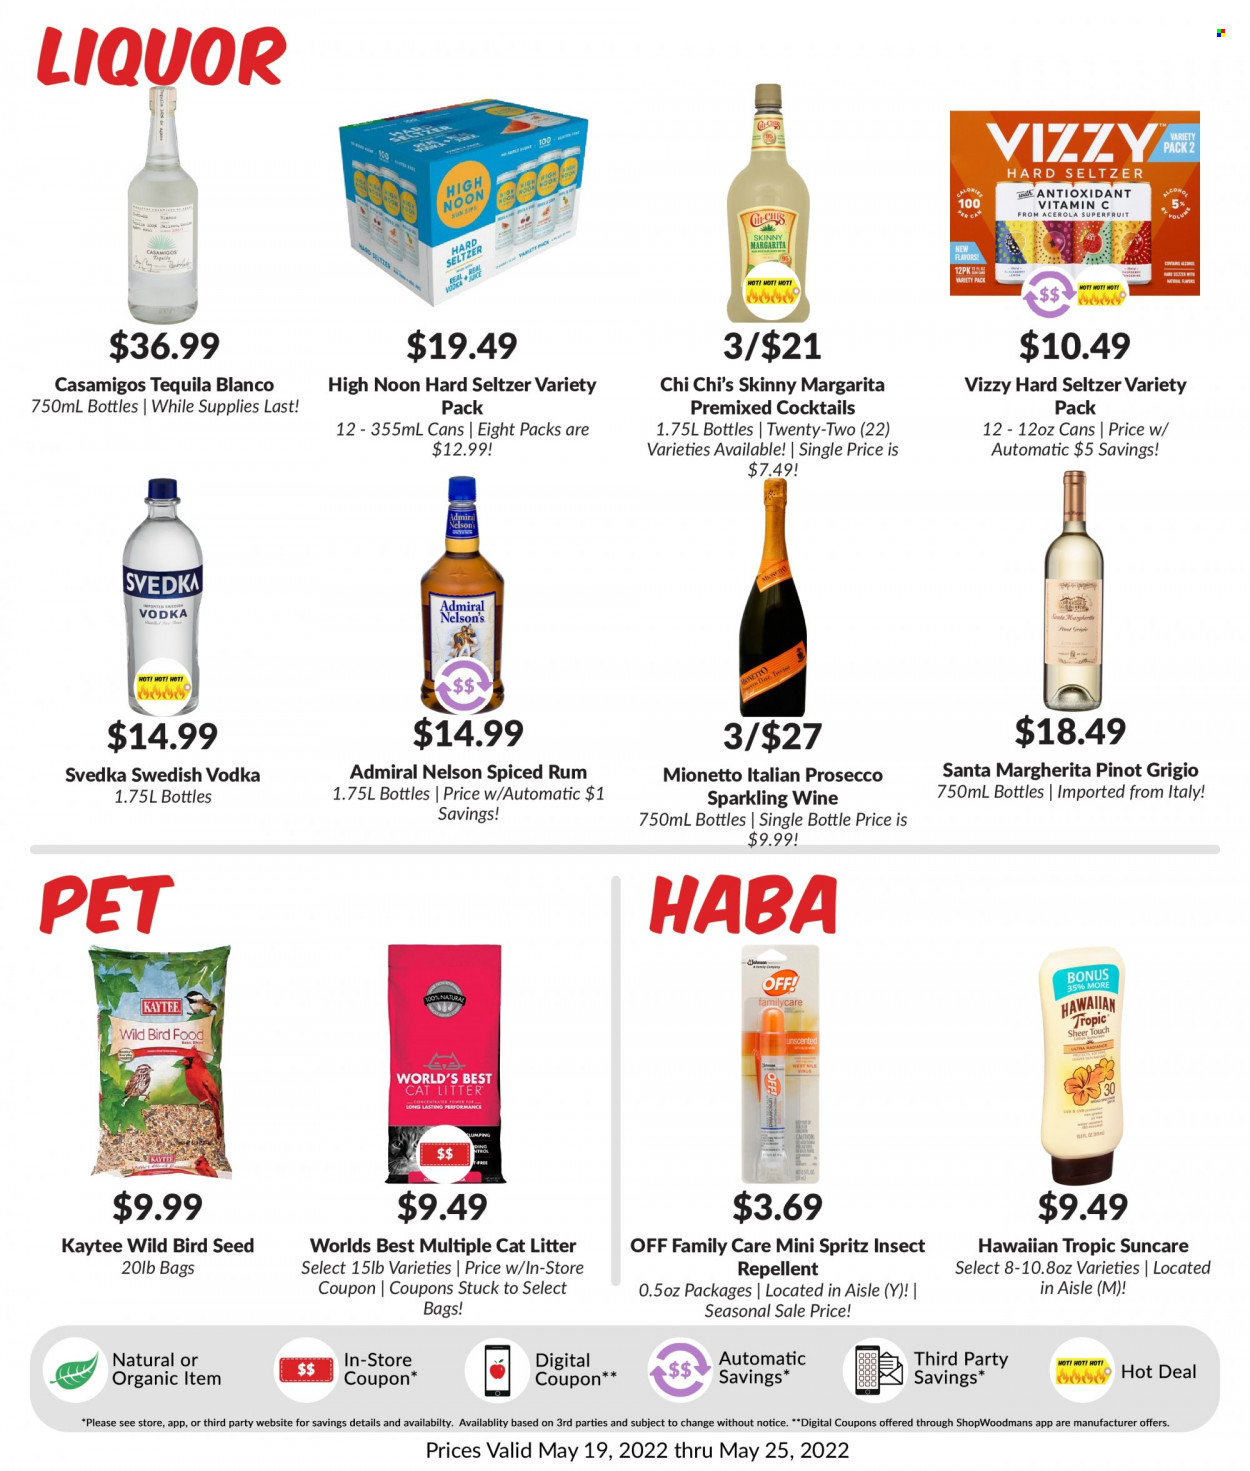 thumbnail - Woodman's Markets Flyer - 05/19/2022 - 05/25/2022 - Sales products - Santa, sparkling wine, white wine, prosecco, wine, Pinot Grigio, rum, spiced rum, tequila, vodka, Hard Seltzer, animal food, bird food, Kaytee. Page 6.